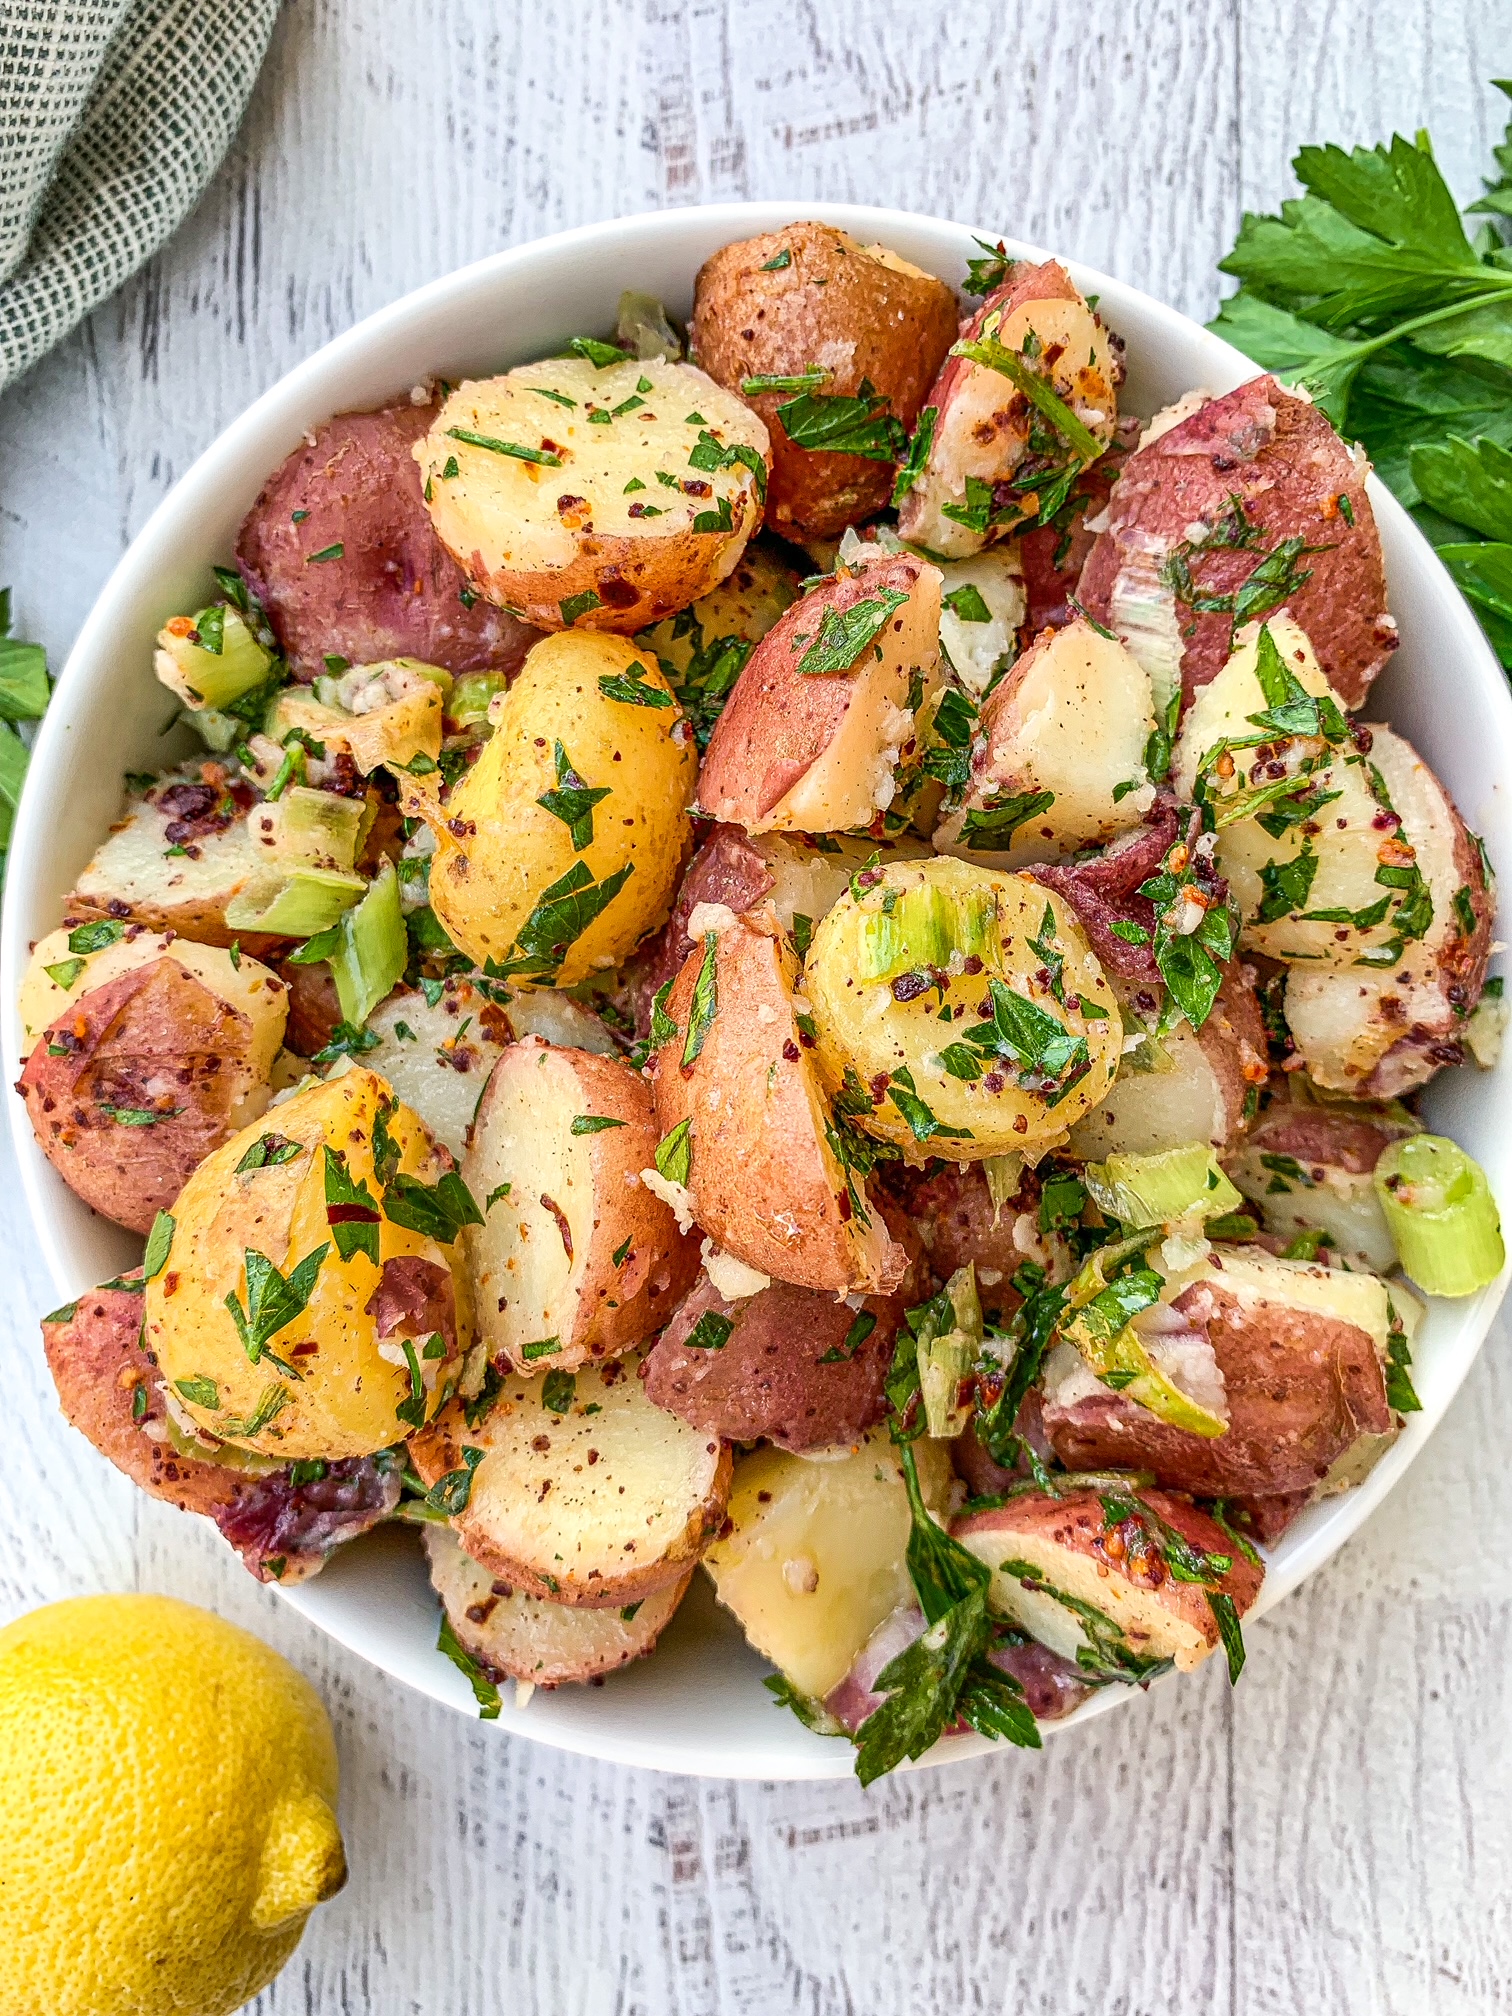 Turkish Potato Salad in a white bowl covered with herbs. Lemon is on the left side with some parsley.